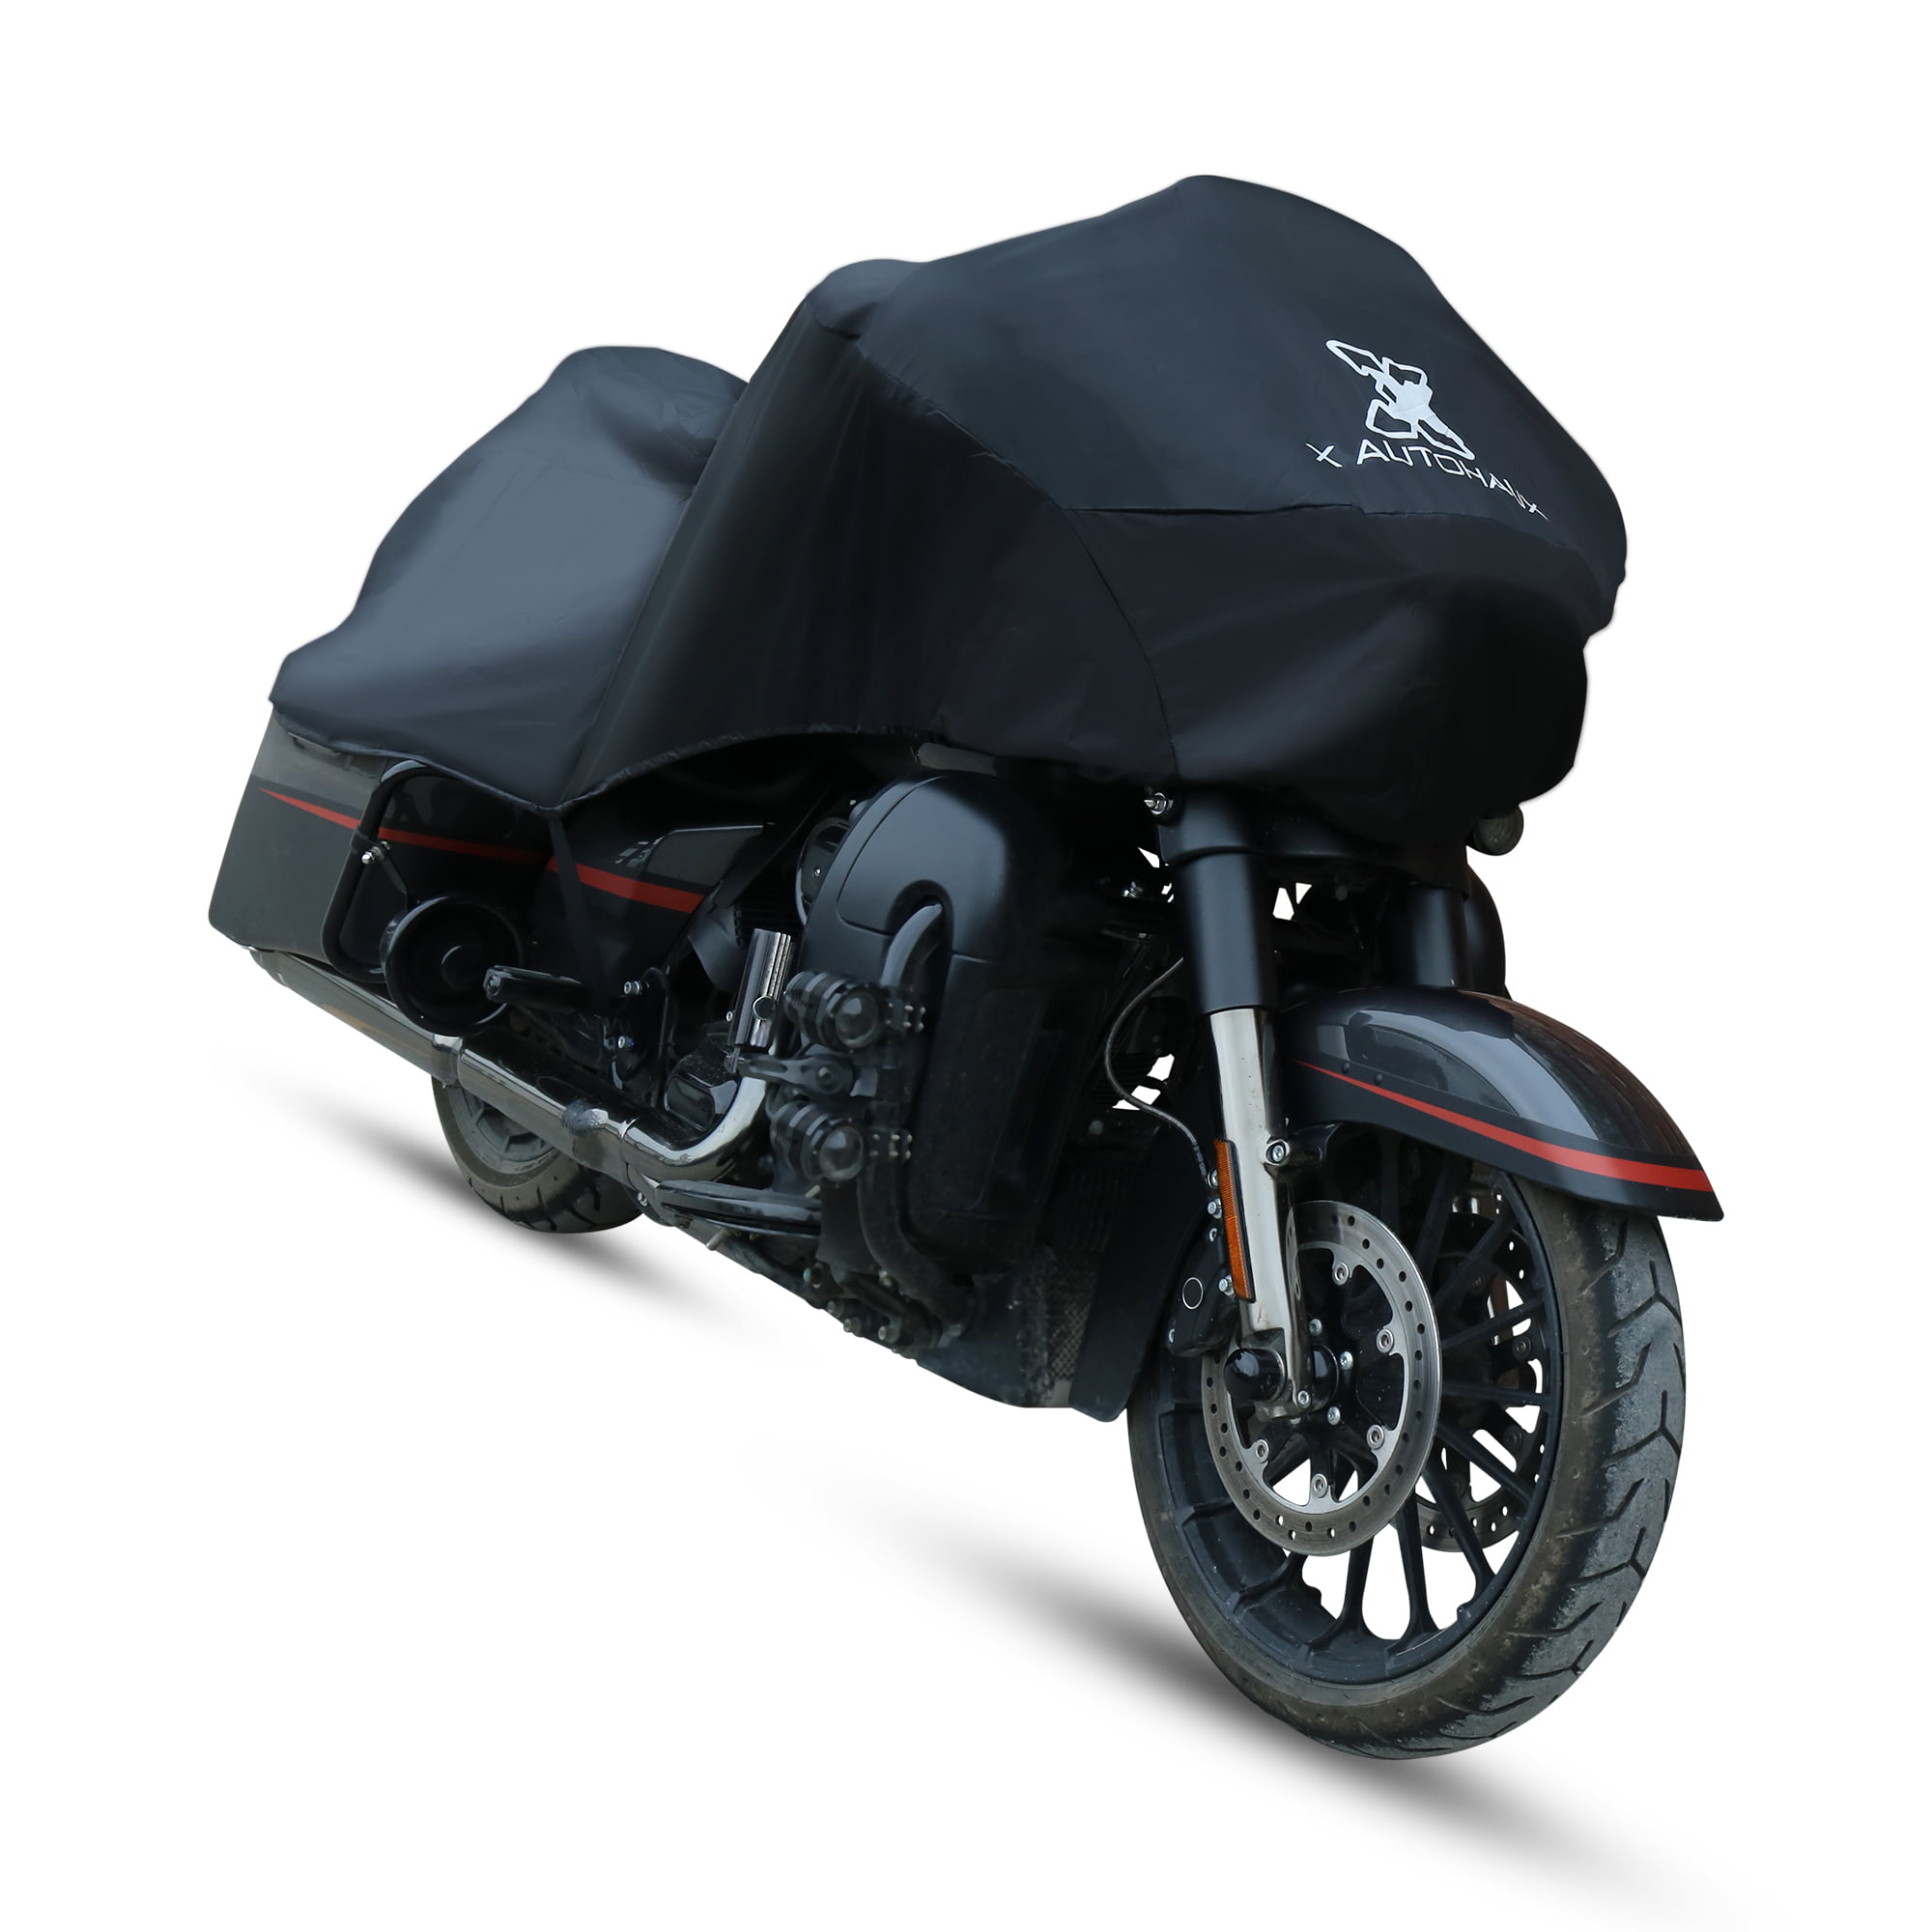 Details about   Motorcycle Bike Cover Travel Dust Cover For Yamaha Road Star Silverado Midnight 